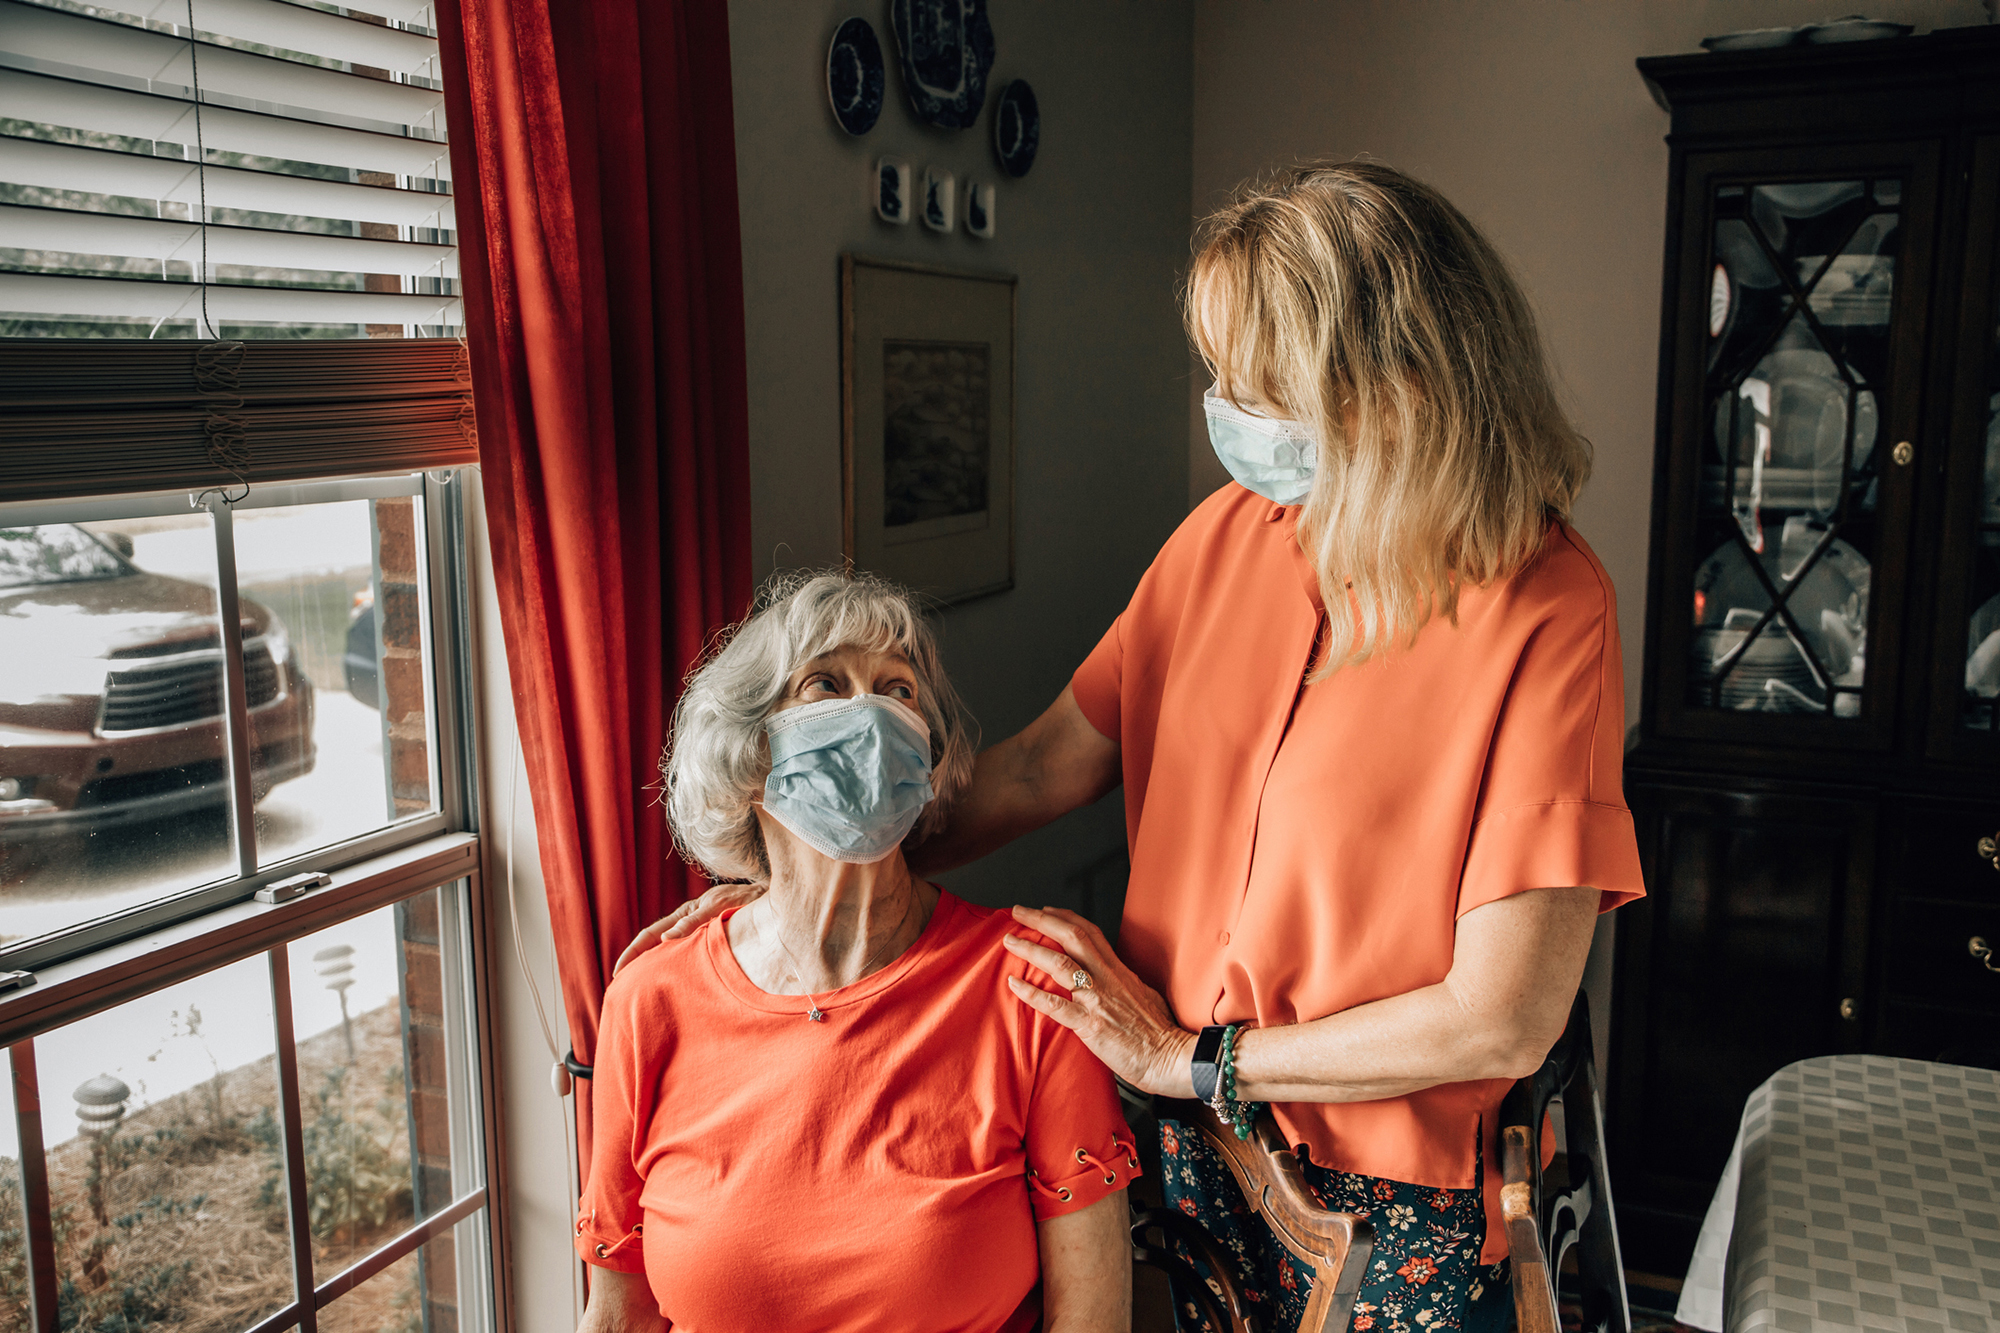 Elderly person wearing face mask in their home at a window being cared for by an adult also wearing a face mask.